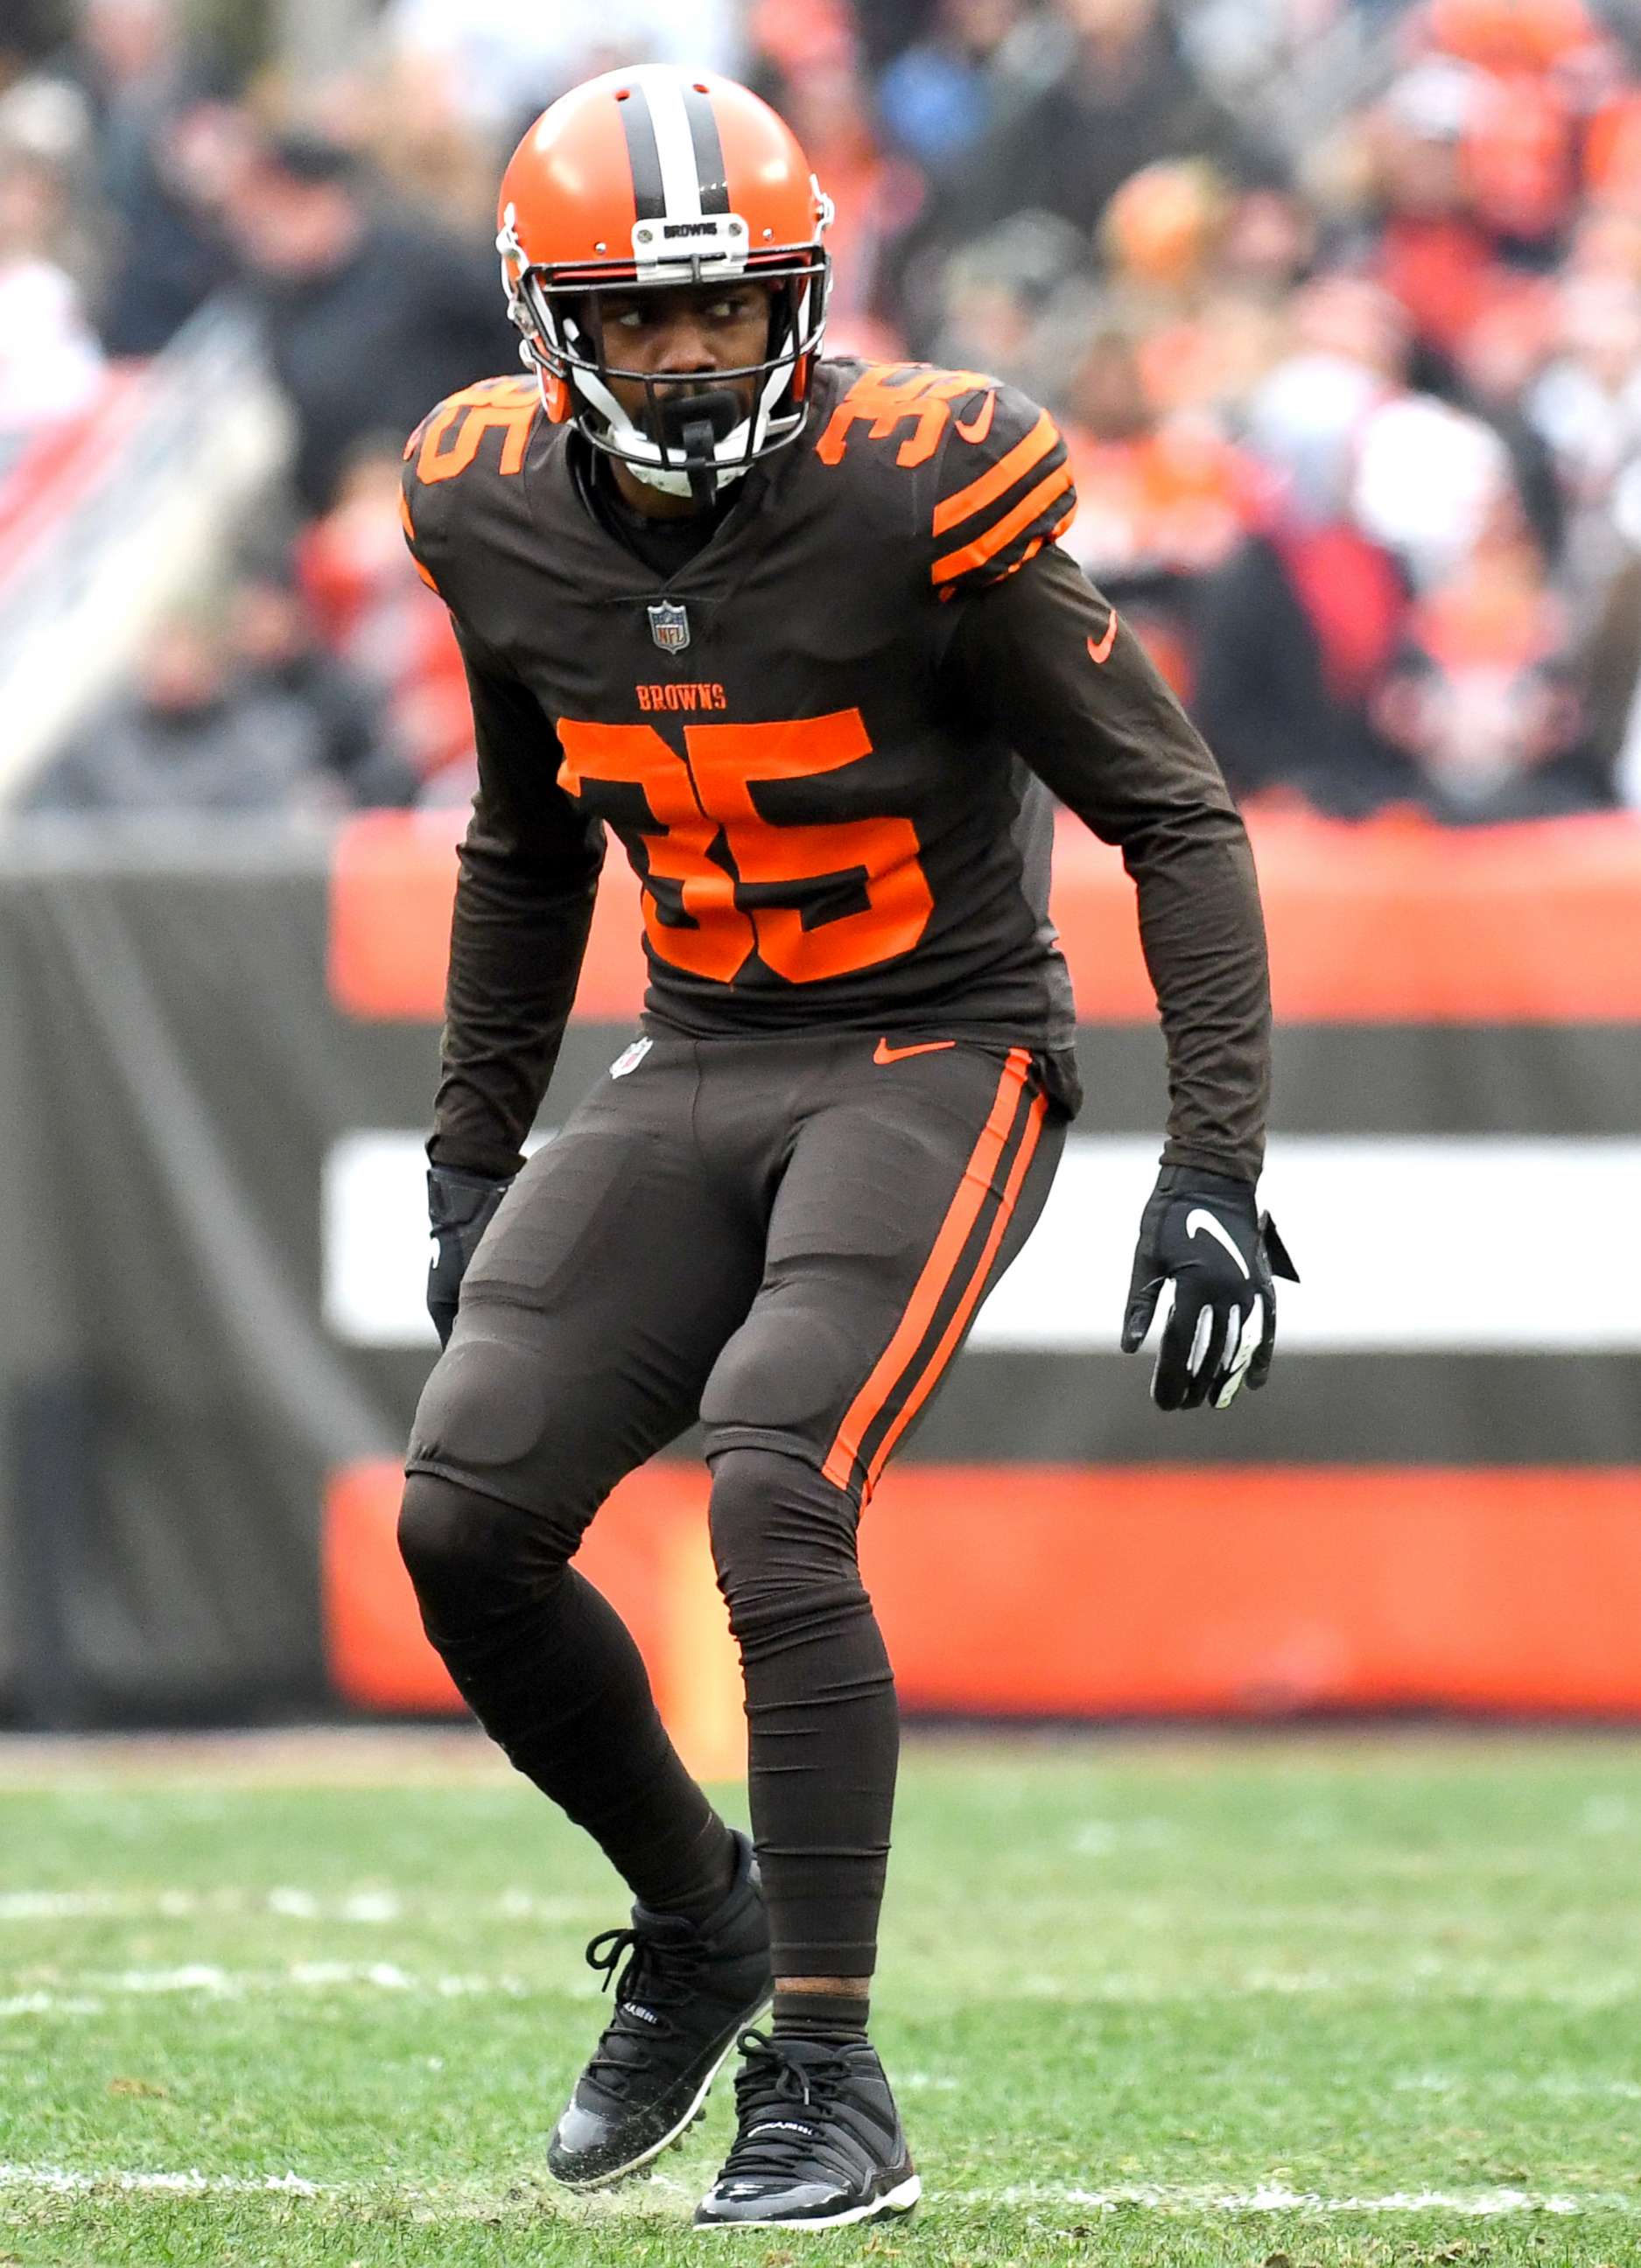 PHOTO:Defensive back Jermaine Whitehead #35 of the Cleveland Browns awaits the snap on a punt in the first quarter of a game against the Cincinnati Bengals, Dec. 23, 2018, in Cleveland, Ohio. 